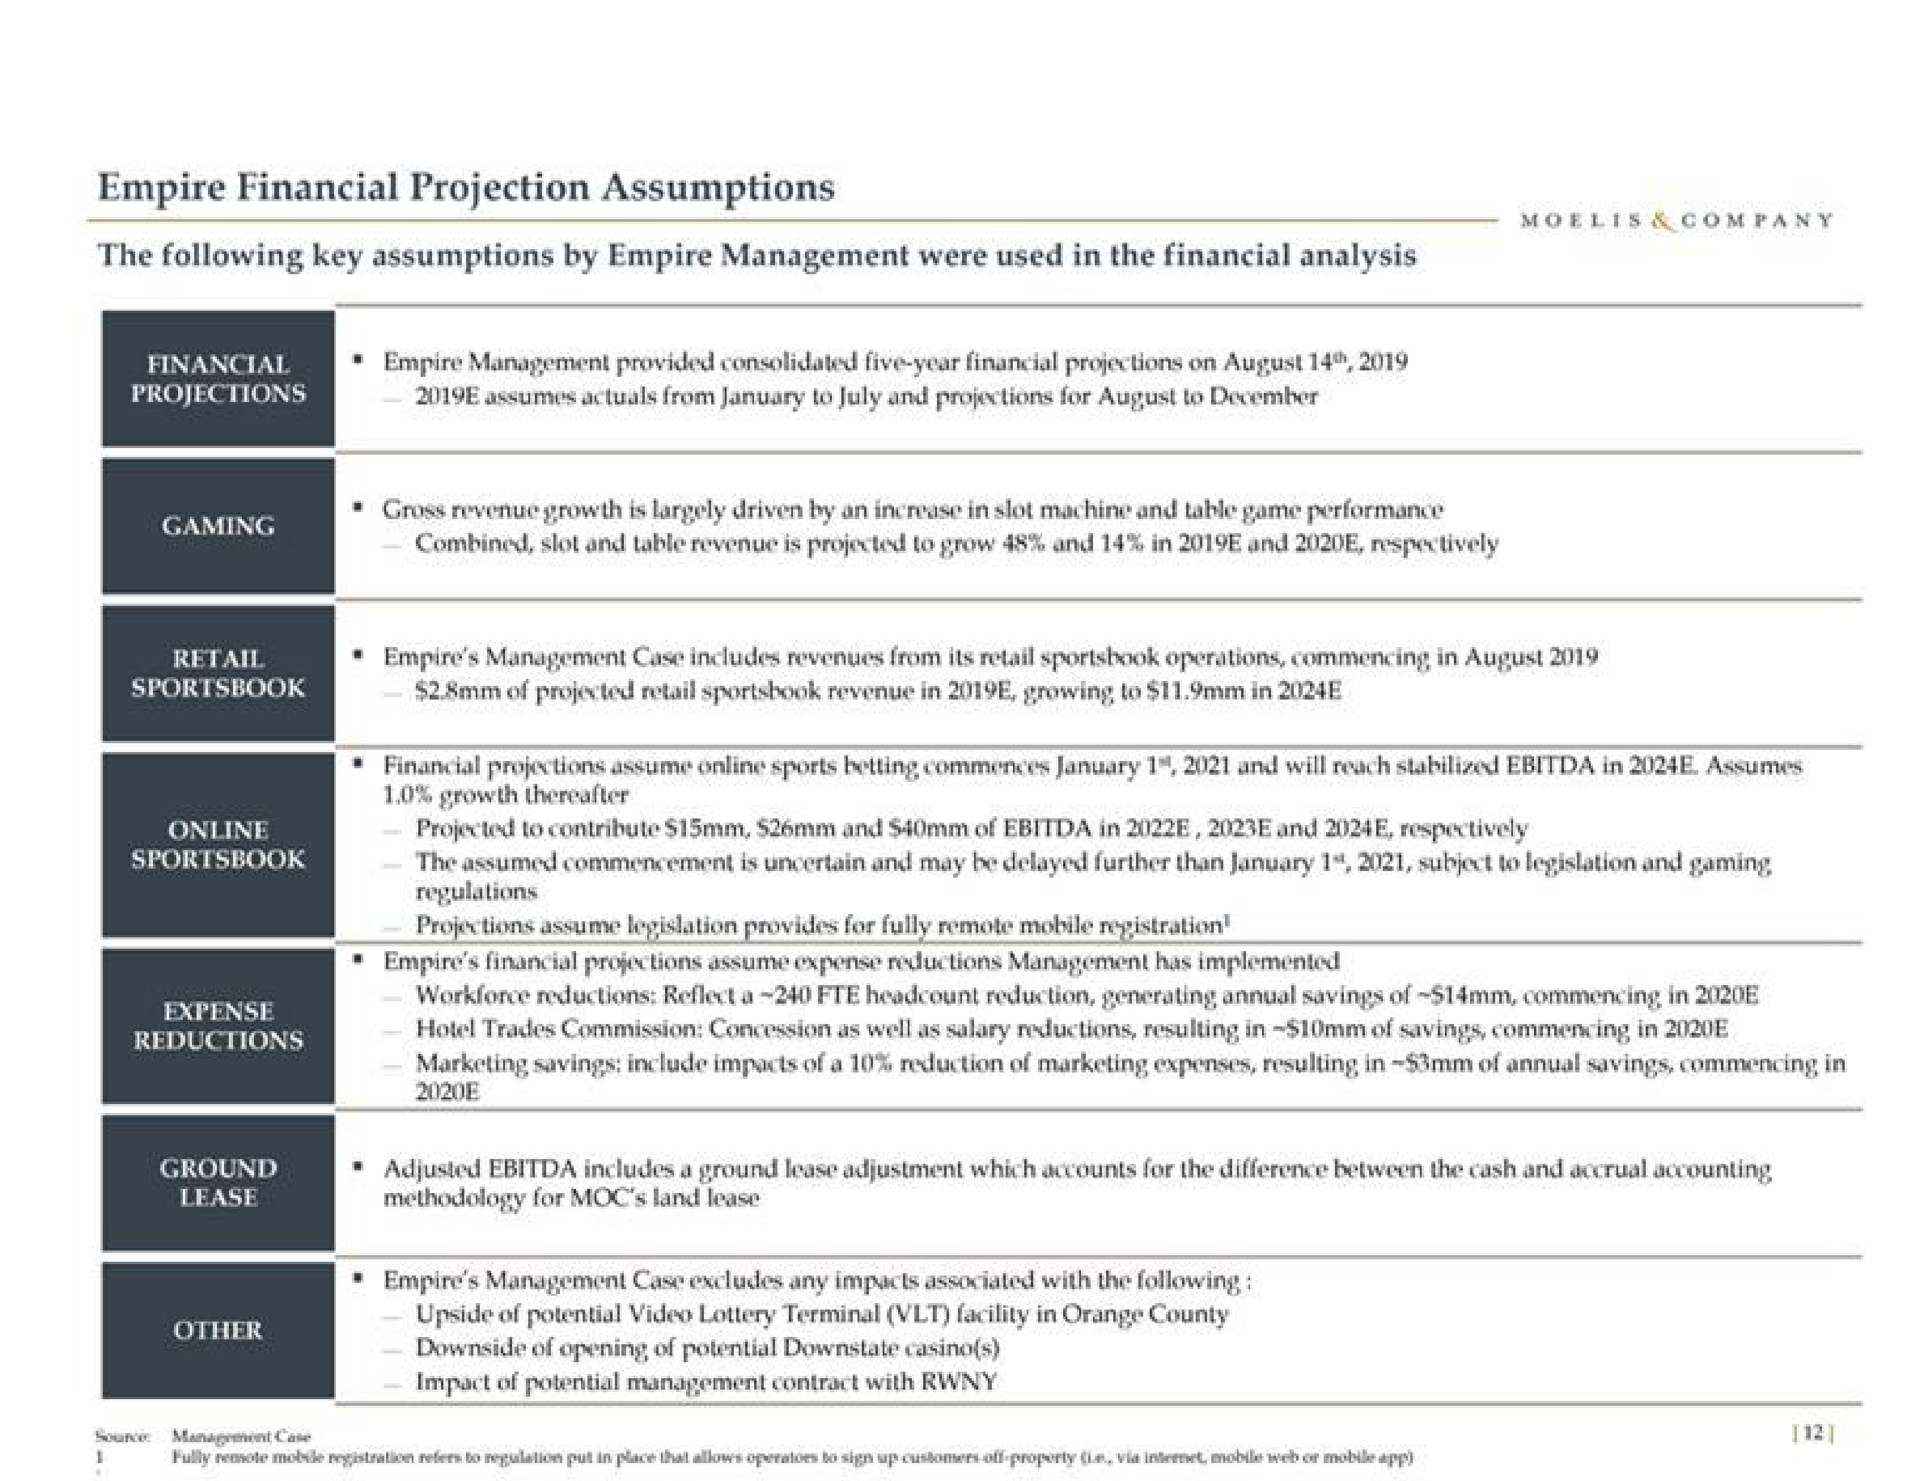 empire financial projection assumptions the following key assumptions by empire management were used in the financial analysis | Moelis & Company